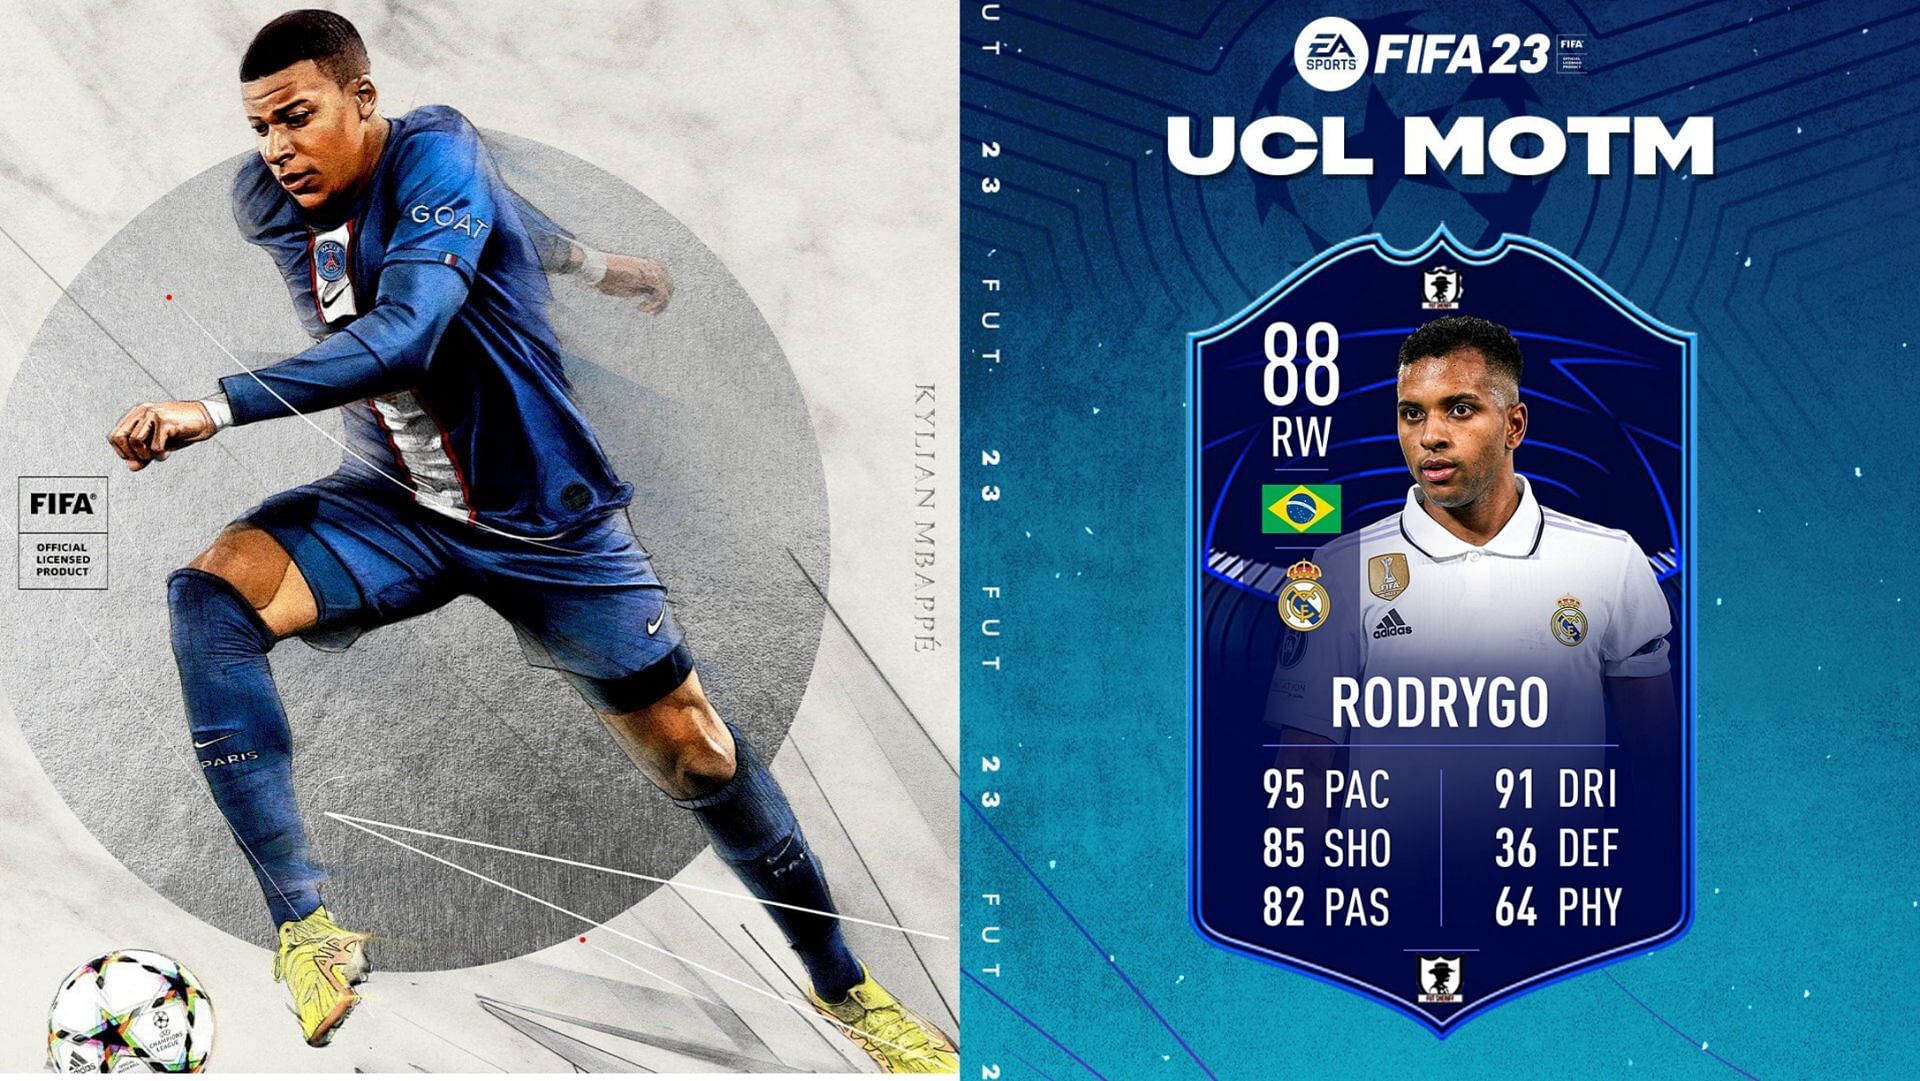 The Rodrygo UCL MOTM card could be extremely pacy in FIFA 23 Ultimate Team (Images via EA Sports, Twitter/FUT Sheriff)